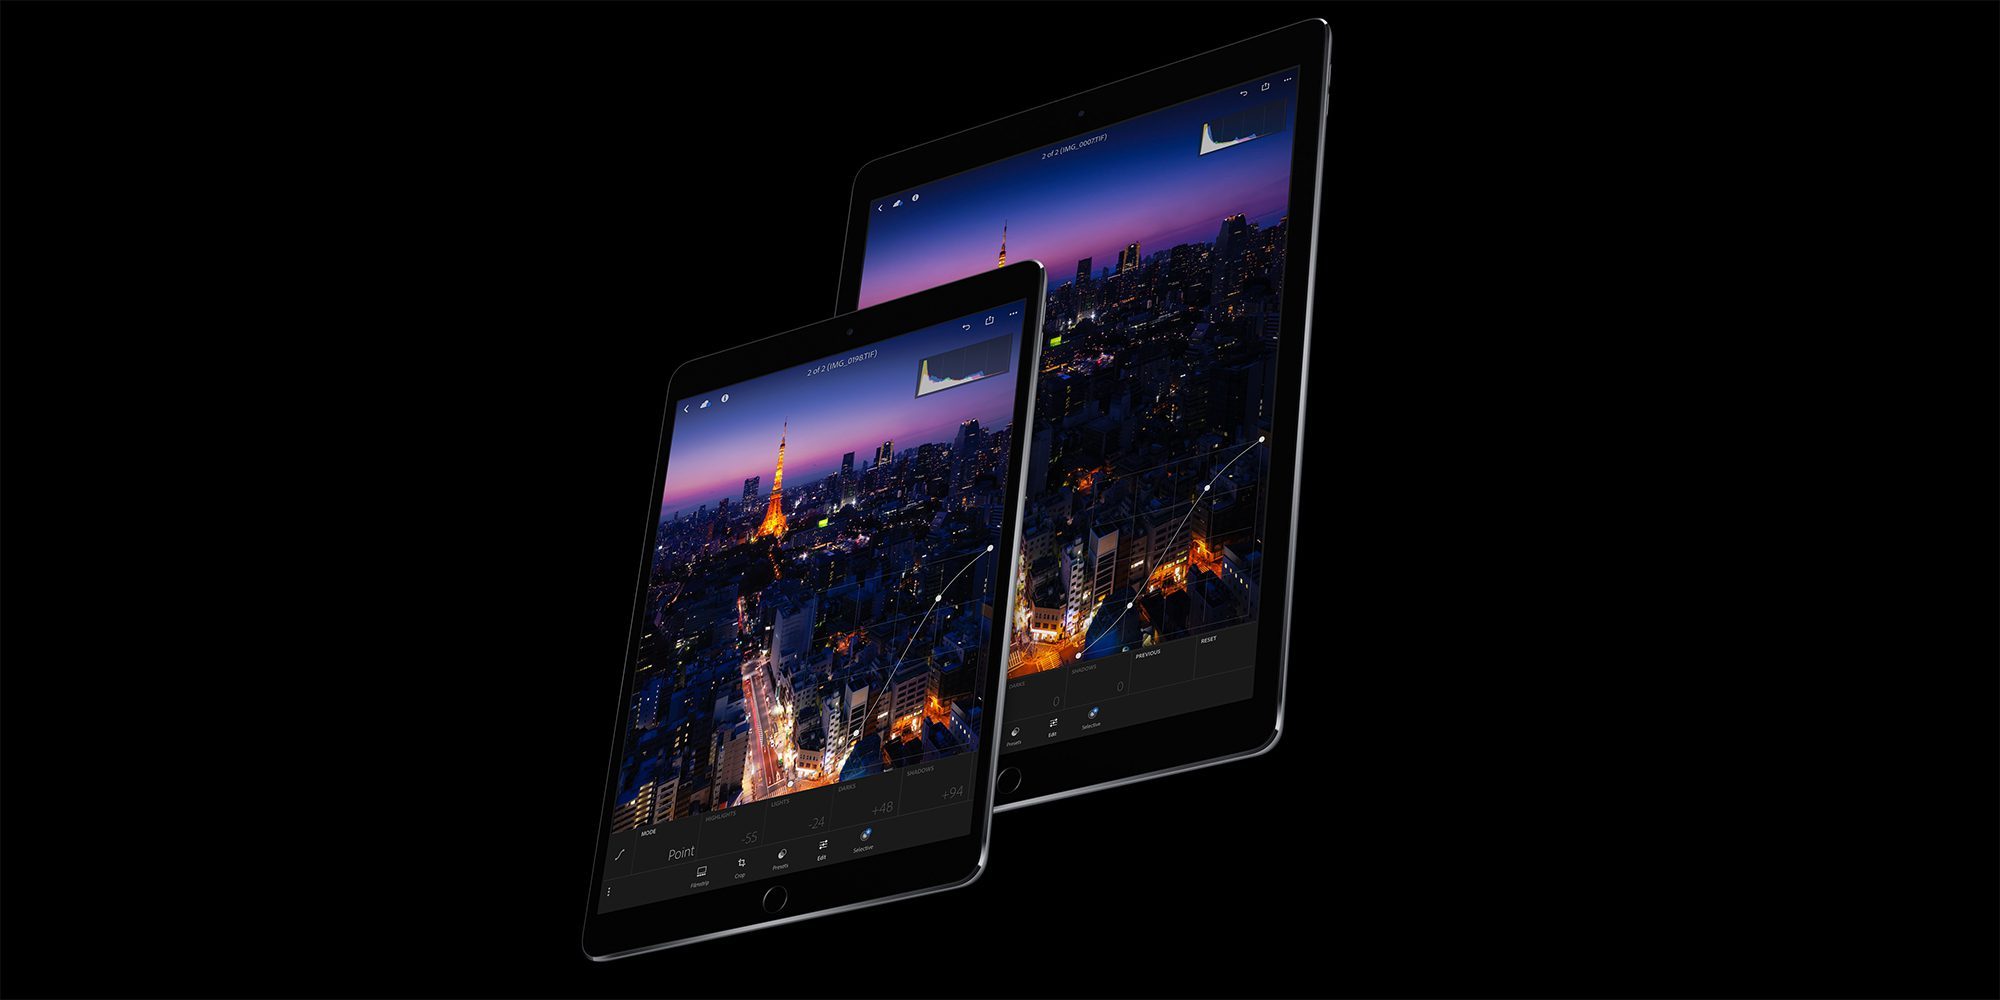 iPad Pro Face ID Details, 4K HDR Video over USB-C, AirPods-like Apple Pencil 2 Pairing, more